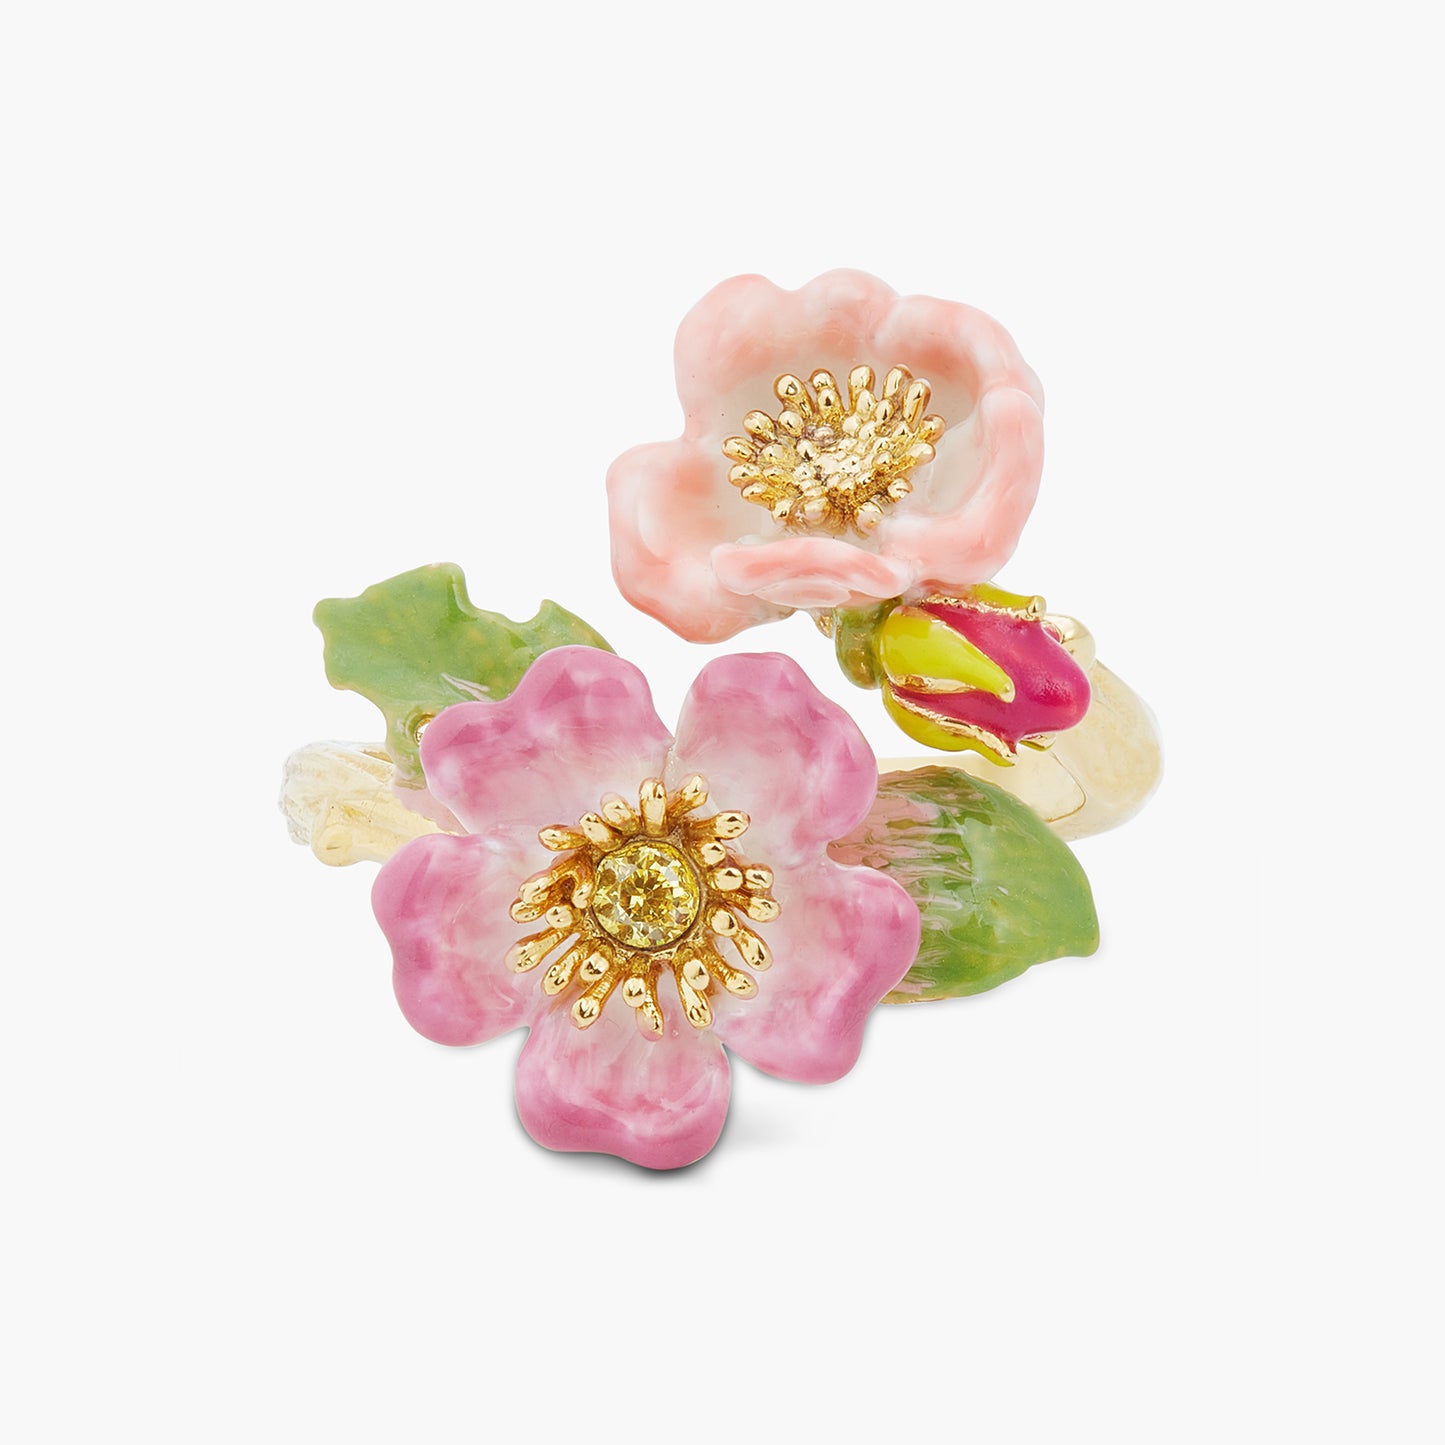 Wild rose and yellow crystal adjustable ring | ASRF6011